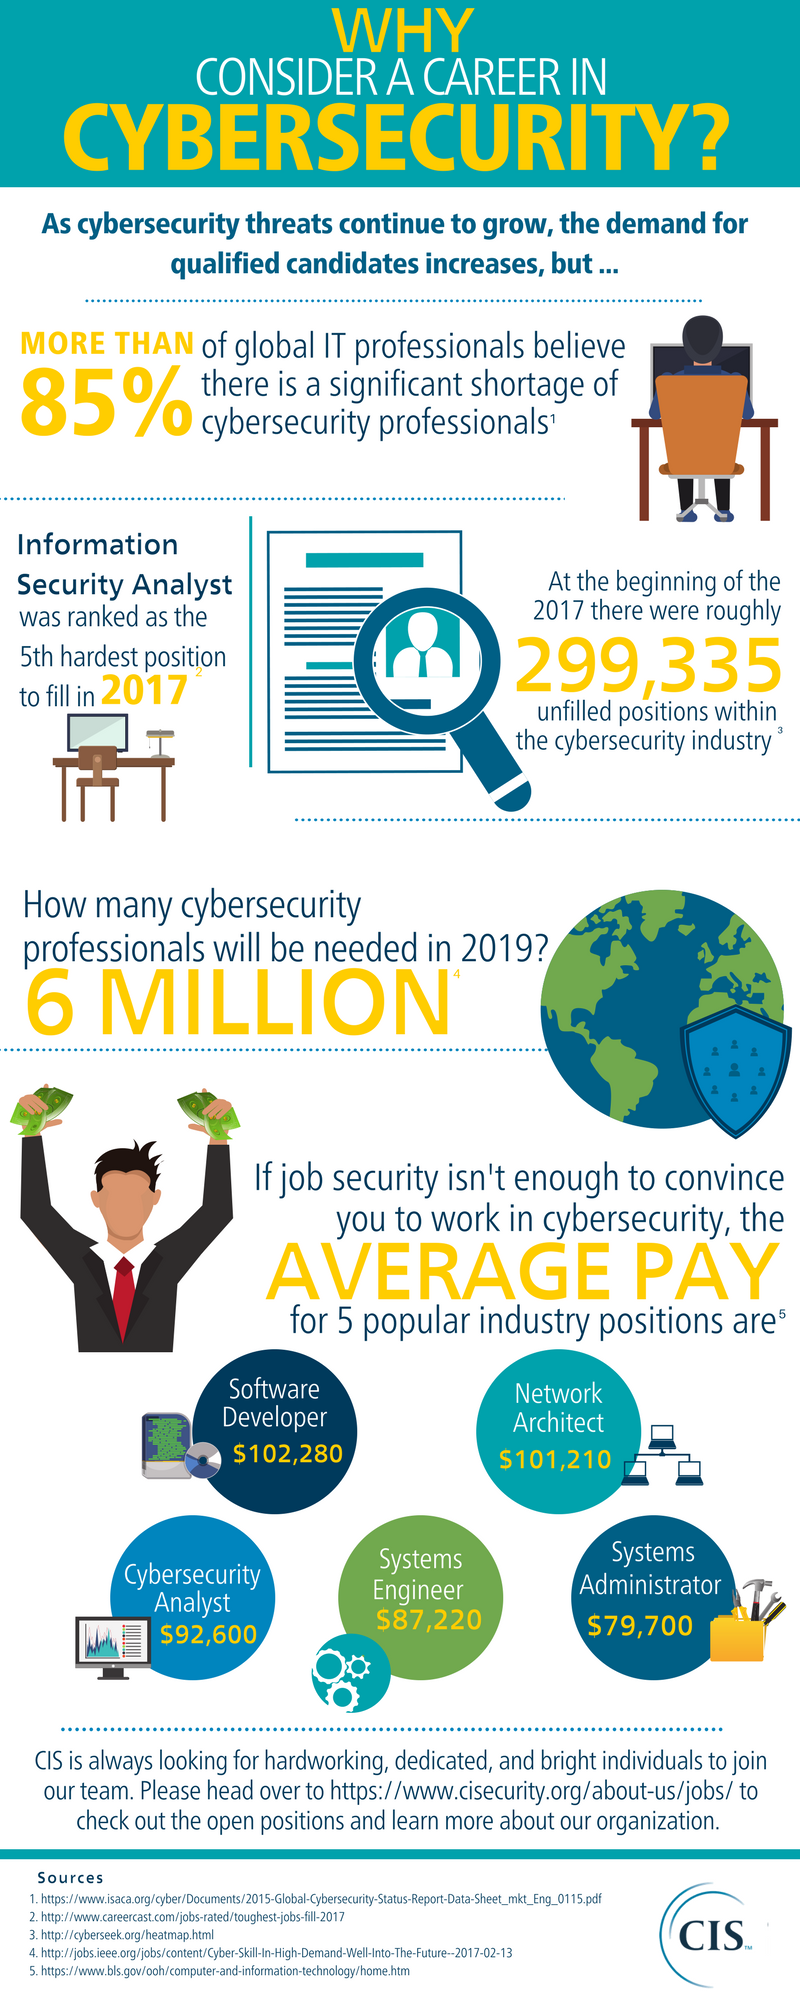 Is cybersecurity in demand in future?